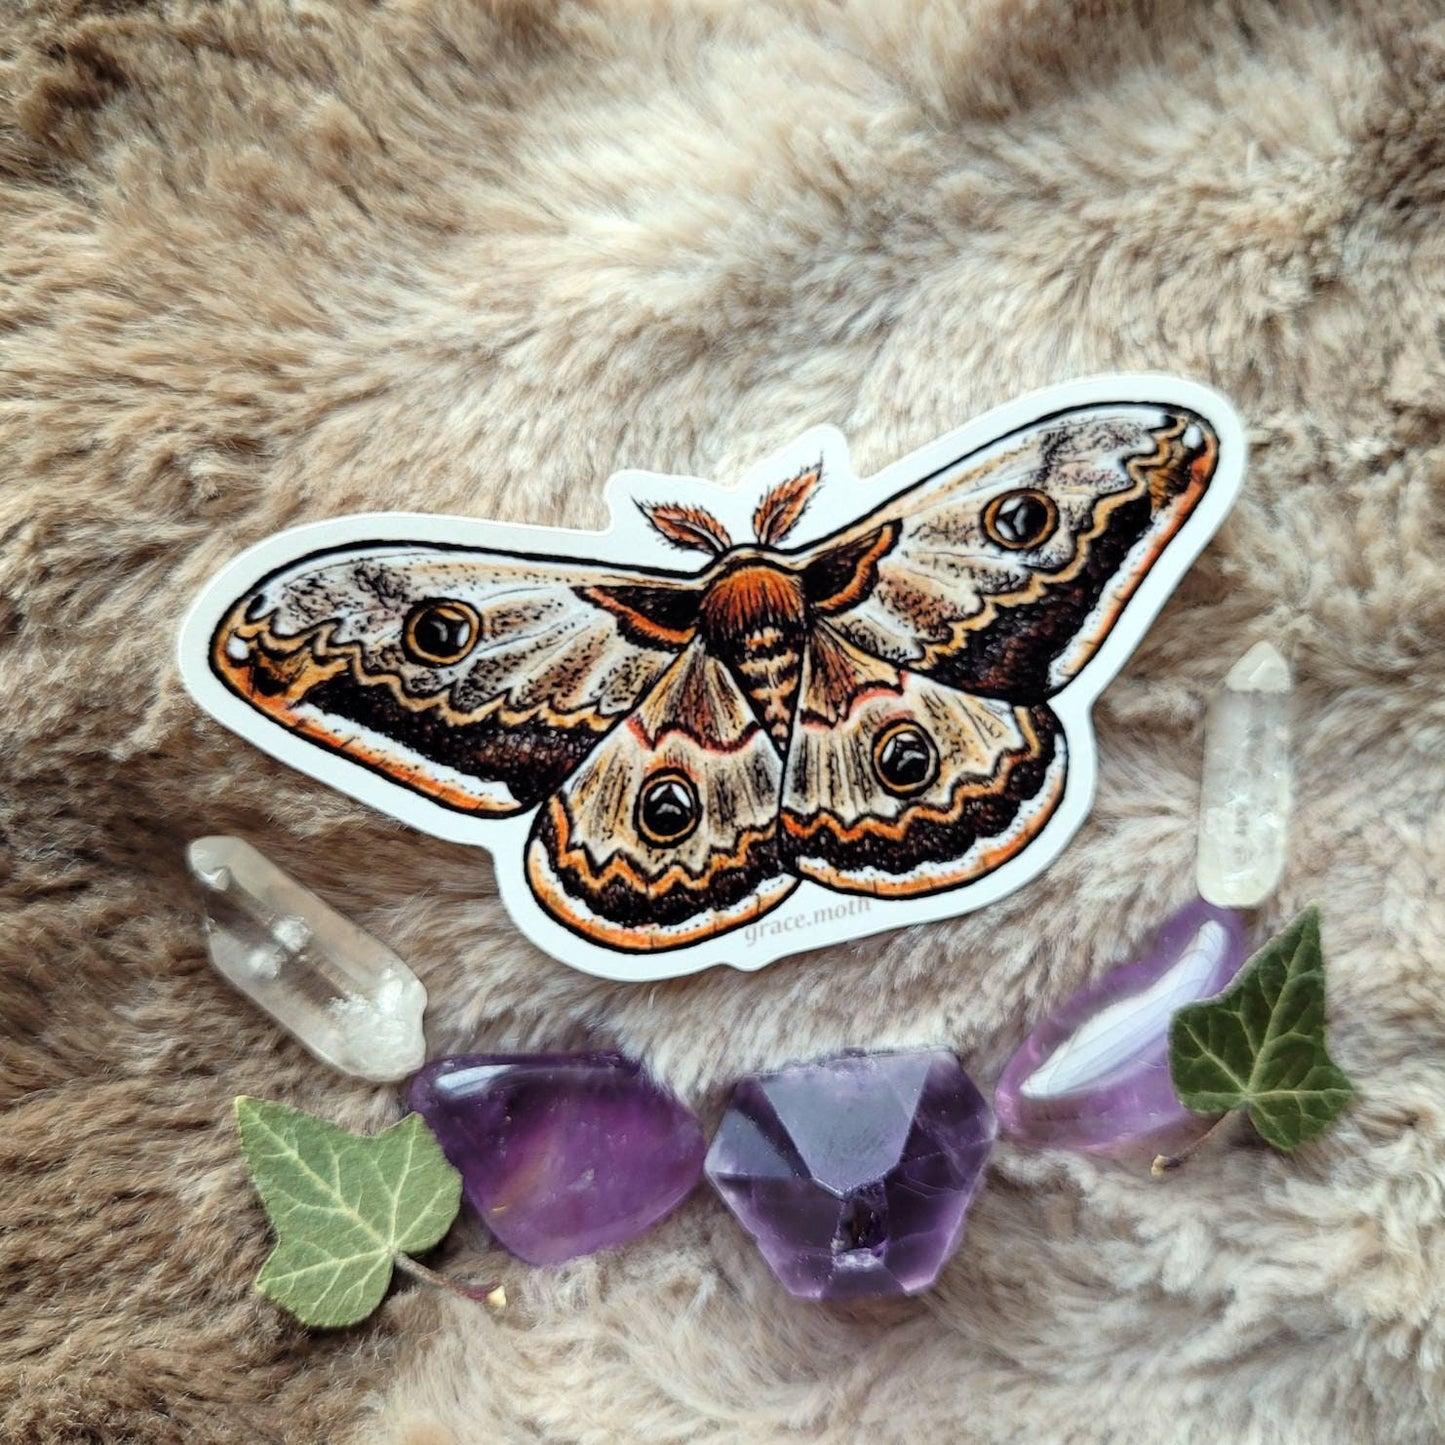 Brown Emperor Moth - Vinyl Sticker 10cm by 5cm - Illustrated by Grace moth. Witchy, cottagecore, insect